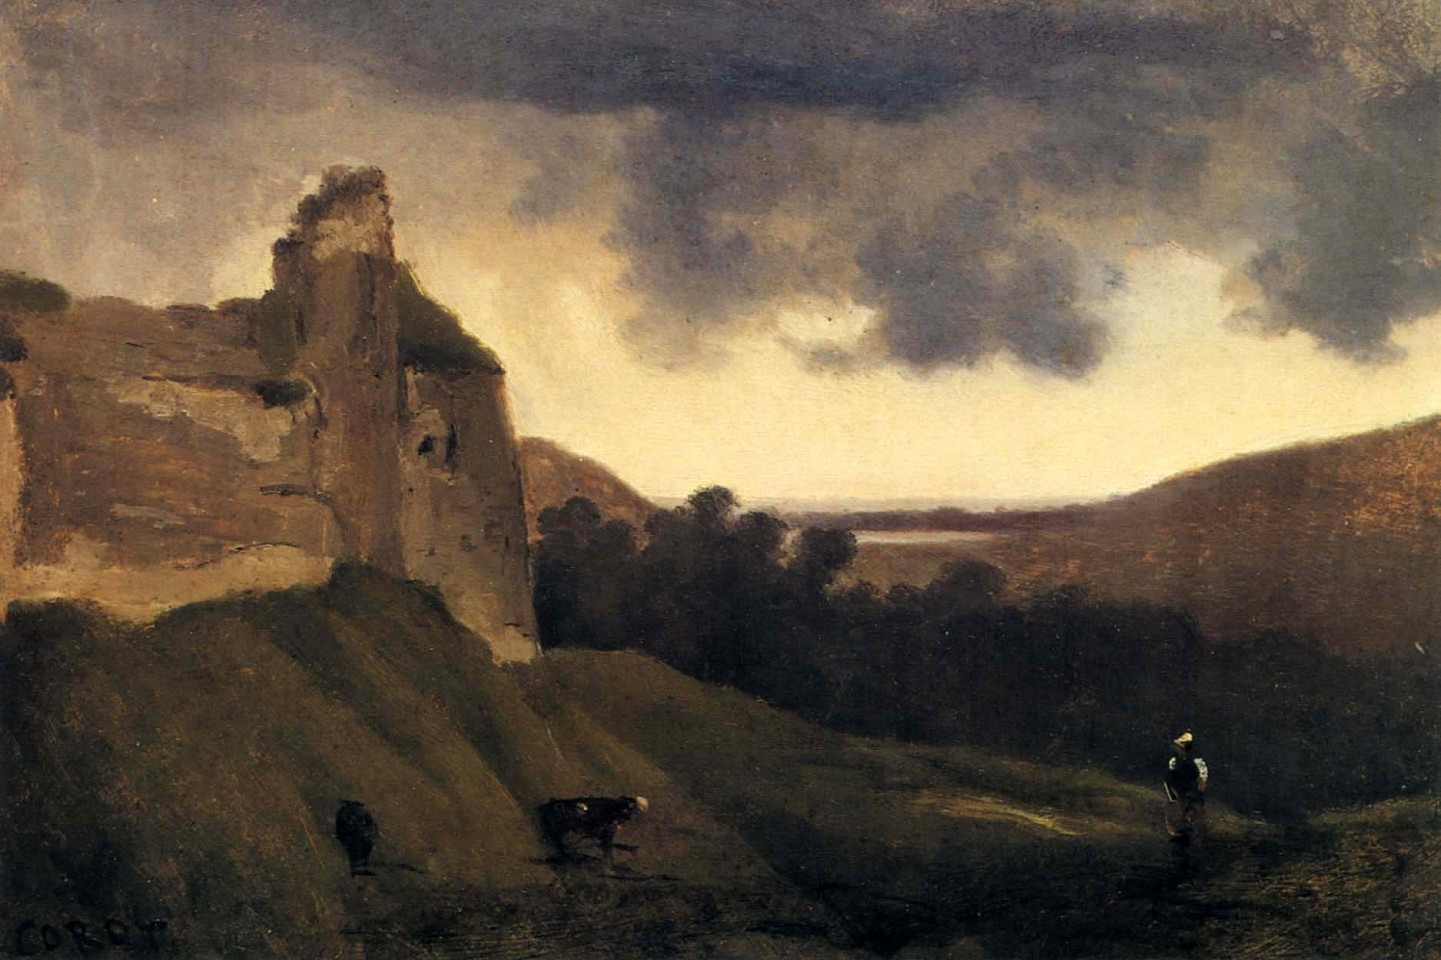 Jean Baptiste Camille Corot, Argues-Ruines du Chateau, 1828-30
Oil on canvas, 8 1/4 x 12 1/4 in. (21 x 31.1 cm)
COR-005-PA
Appraisal Value: $0.00
User2: $0.00
User3: $0.00